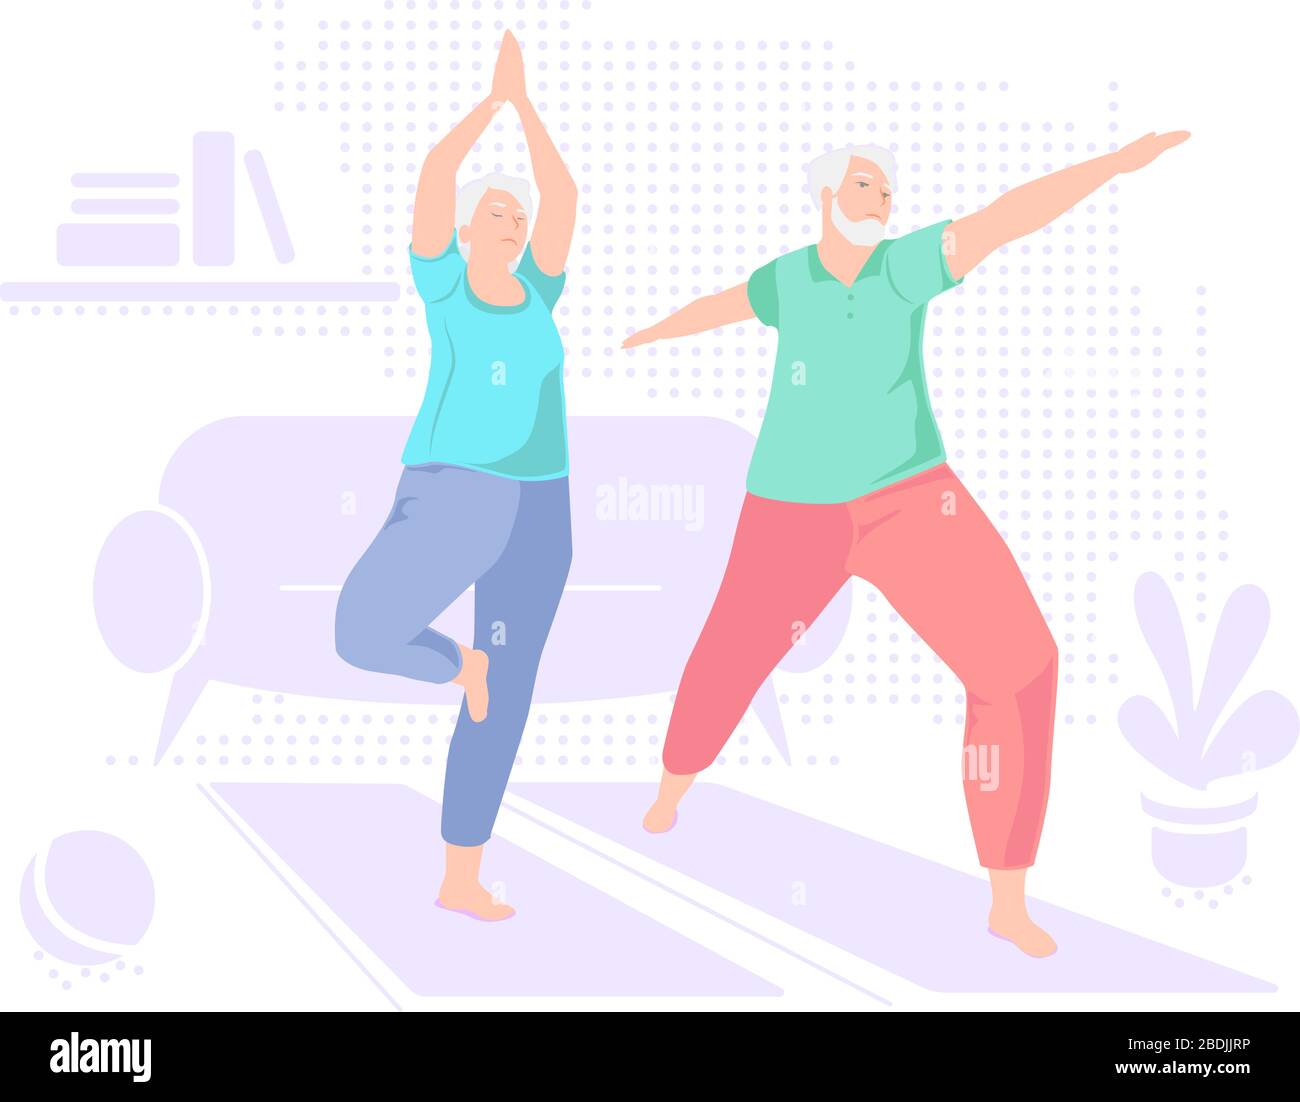 Elderly couple doing yoga at home. Indoor retired leisure. Active healthy lifestyle quarantined. Sport, fitness for senior person. Balance training. Old man and woman exercises vector illustration. Stock Vector